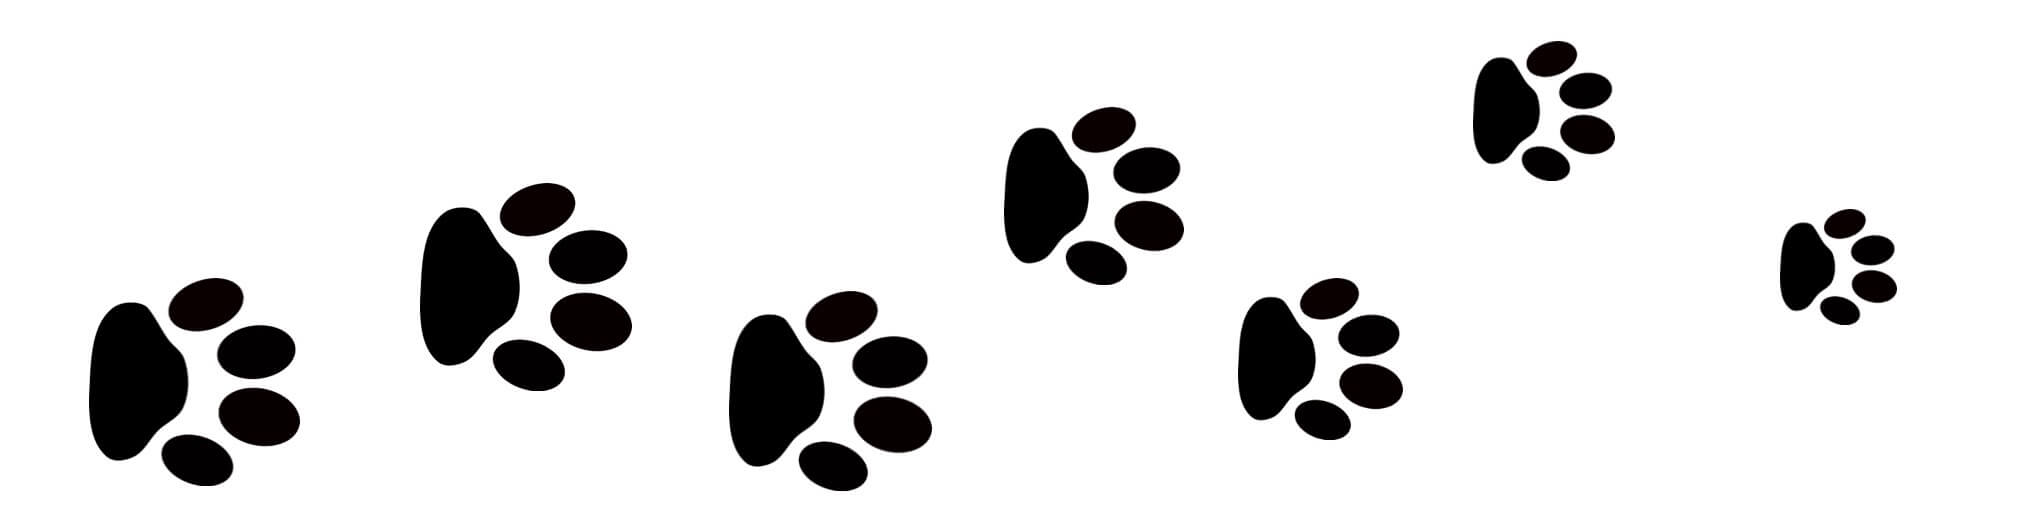 bunny-paw-print-clip-art-20-free-cliparts-download-images-on